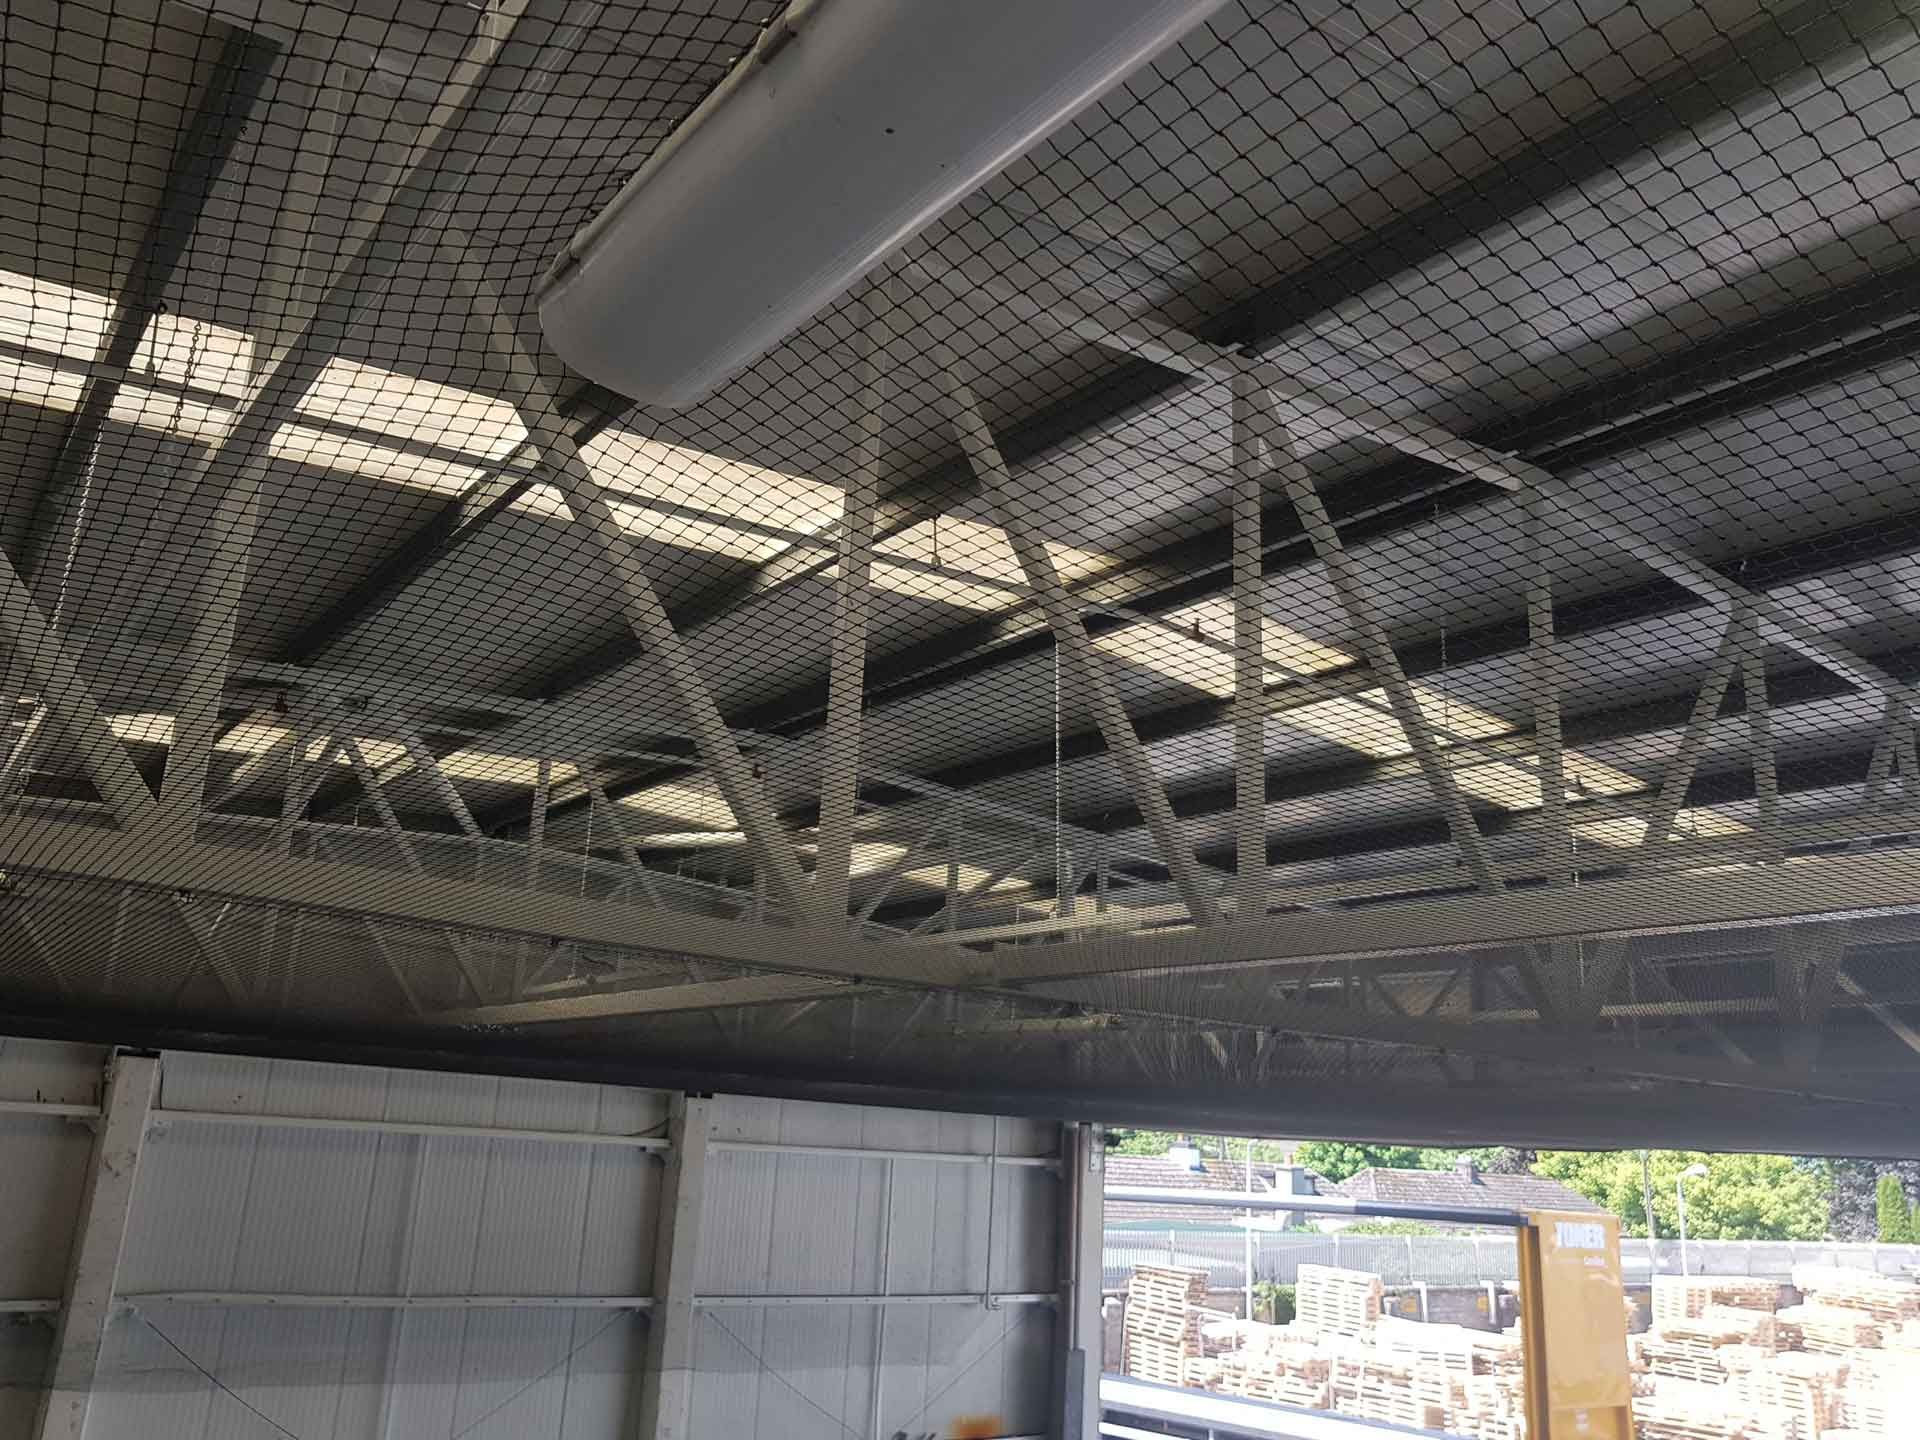 Close up of bird netting installed in a warehouse